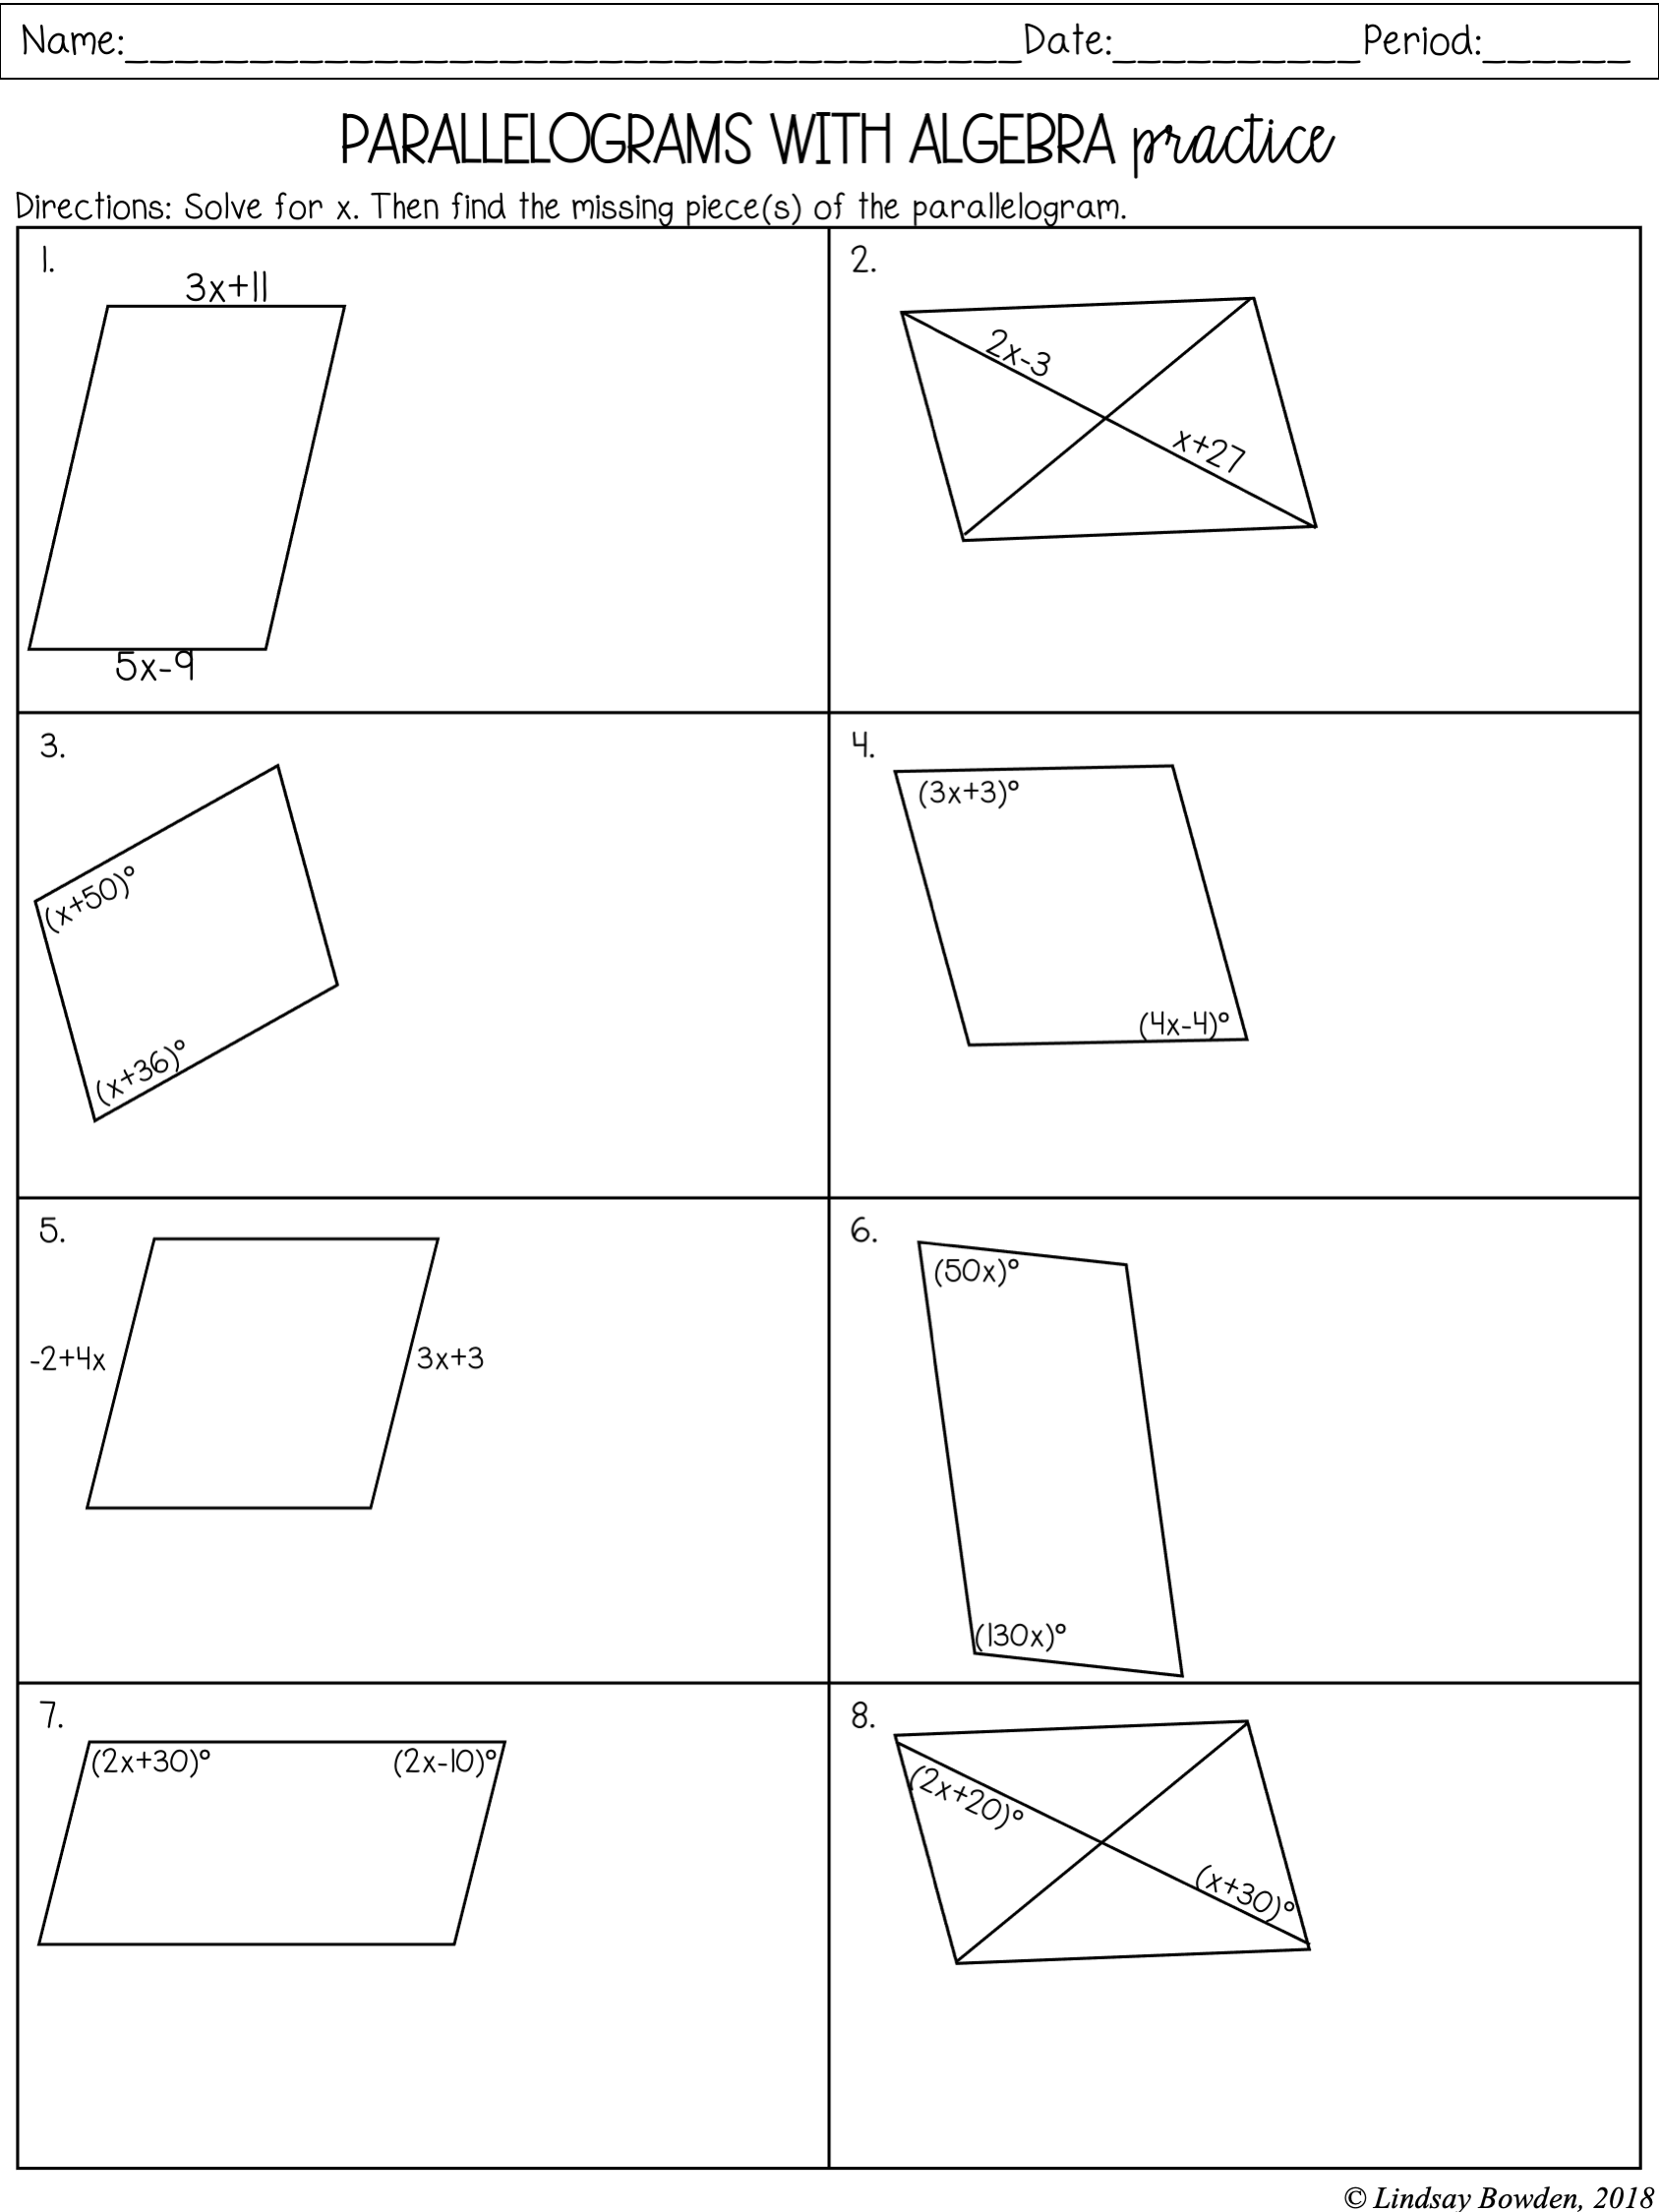 Parallelograms Notes and Worksheets - Lindsay Bowden Inside Properties Of Parallelograms Worksheet